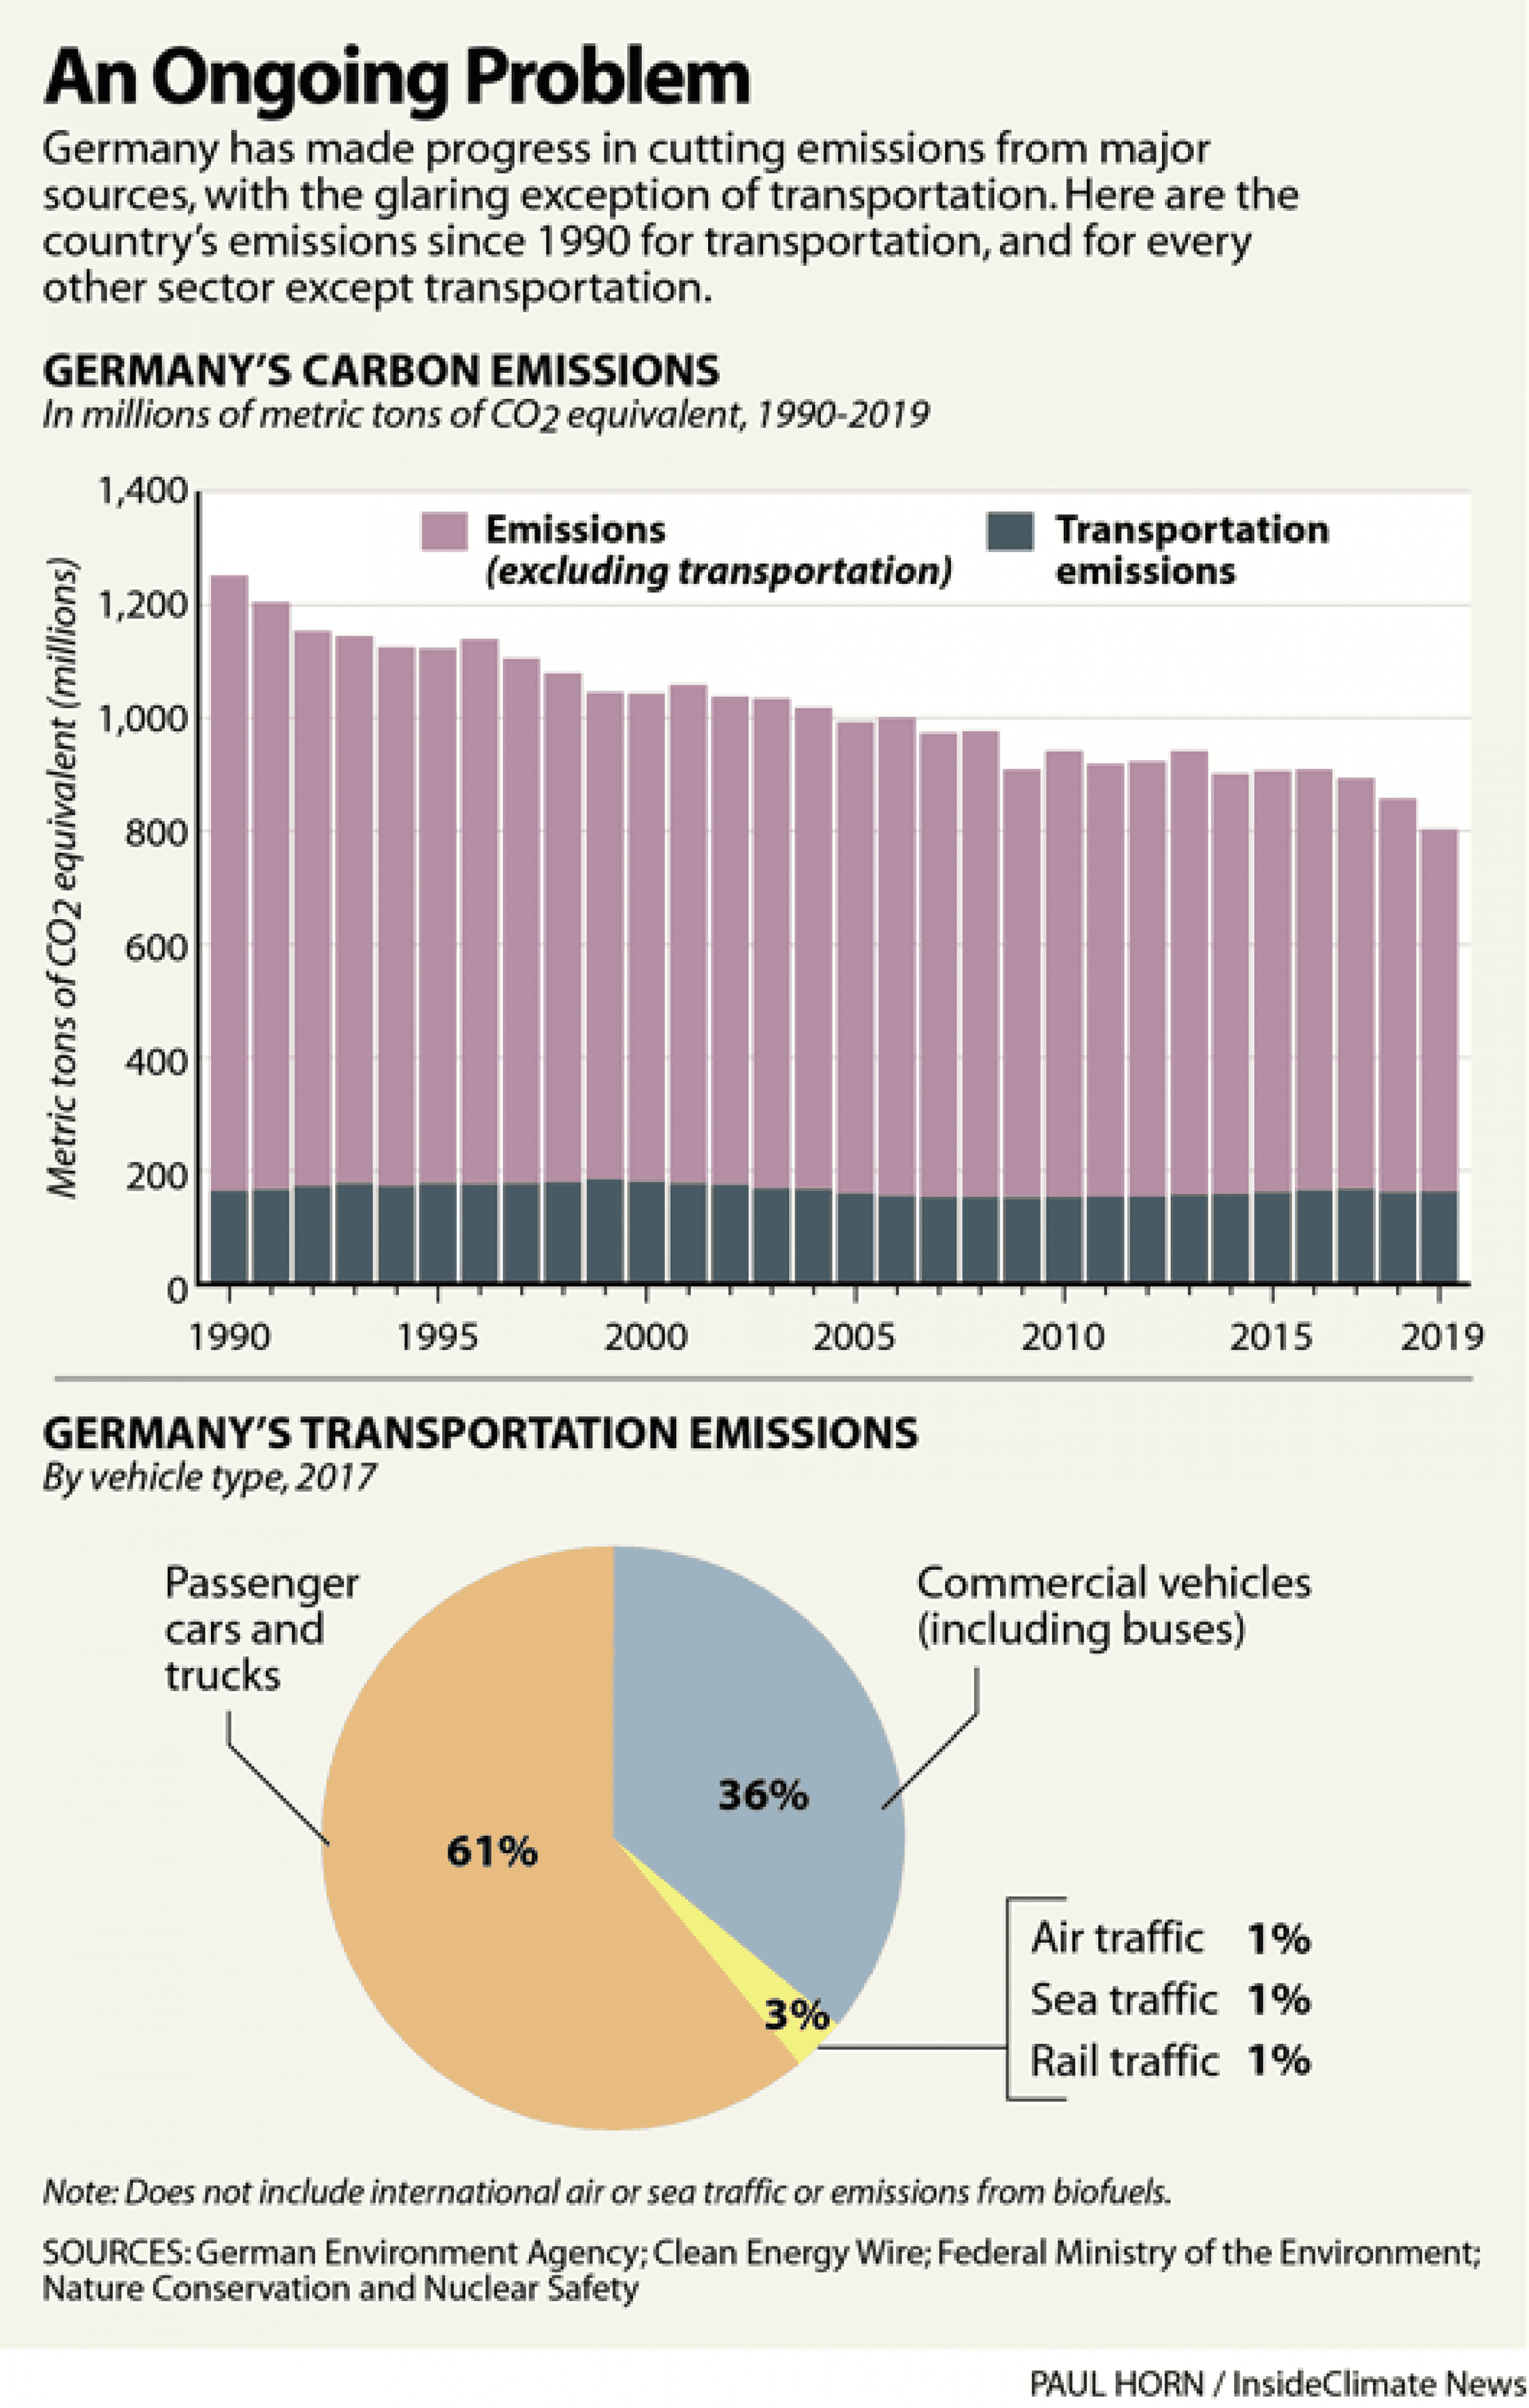 A bar graph showing Germany's auto emissions. 